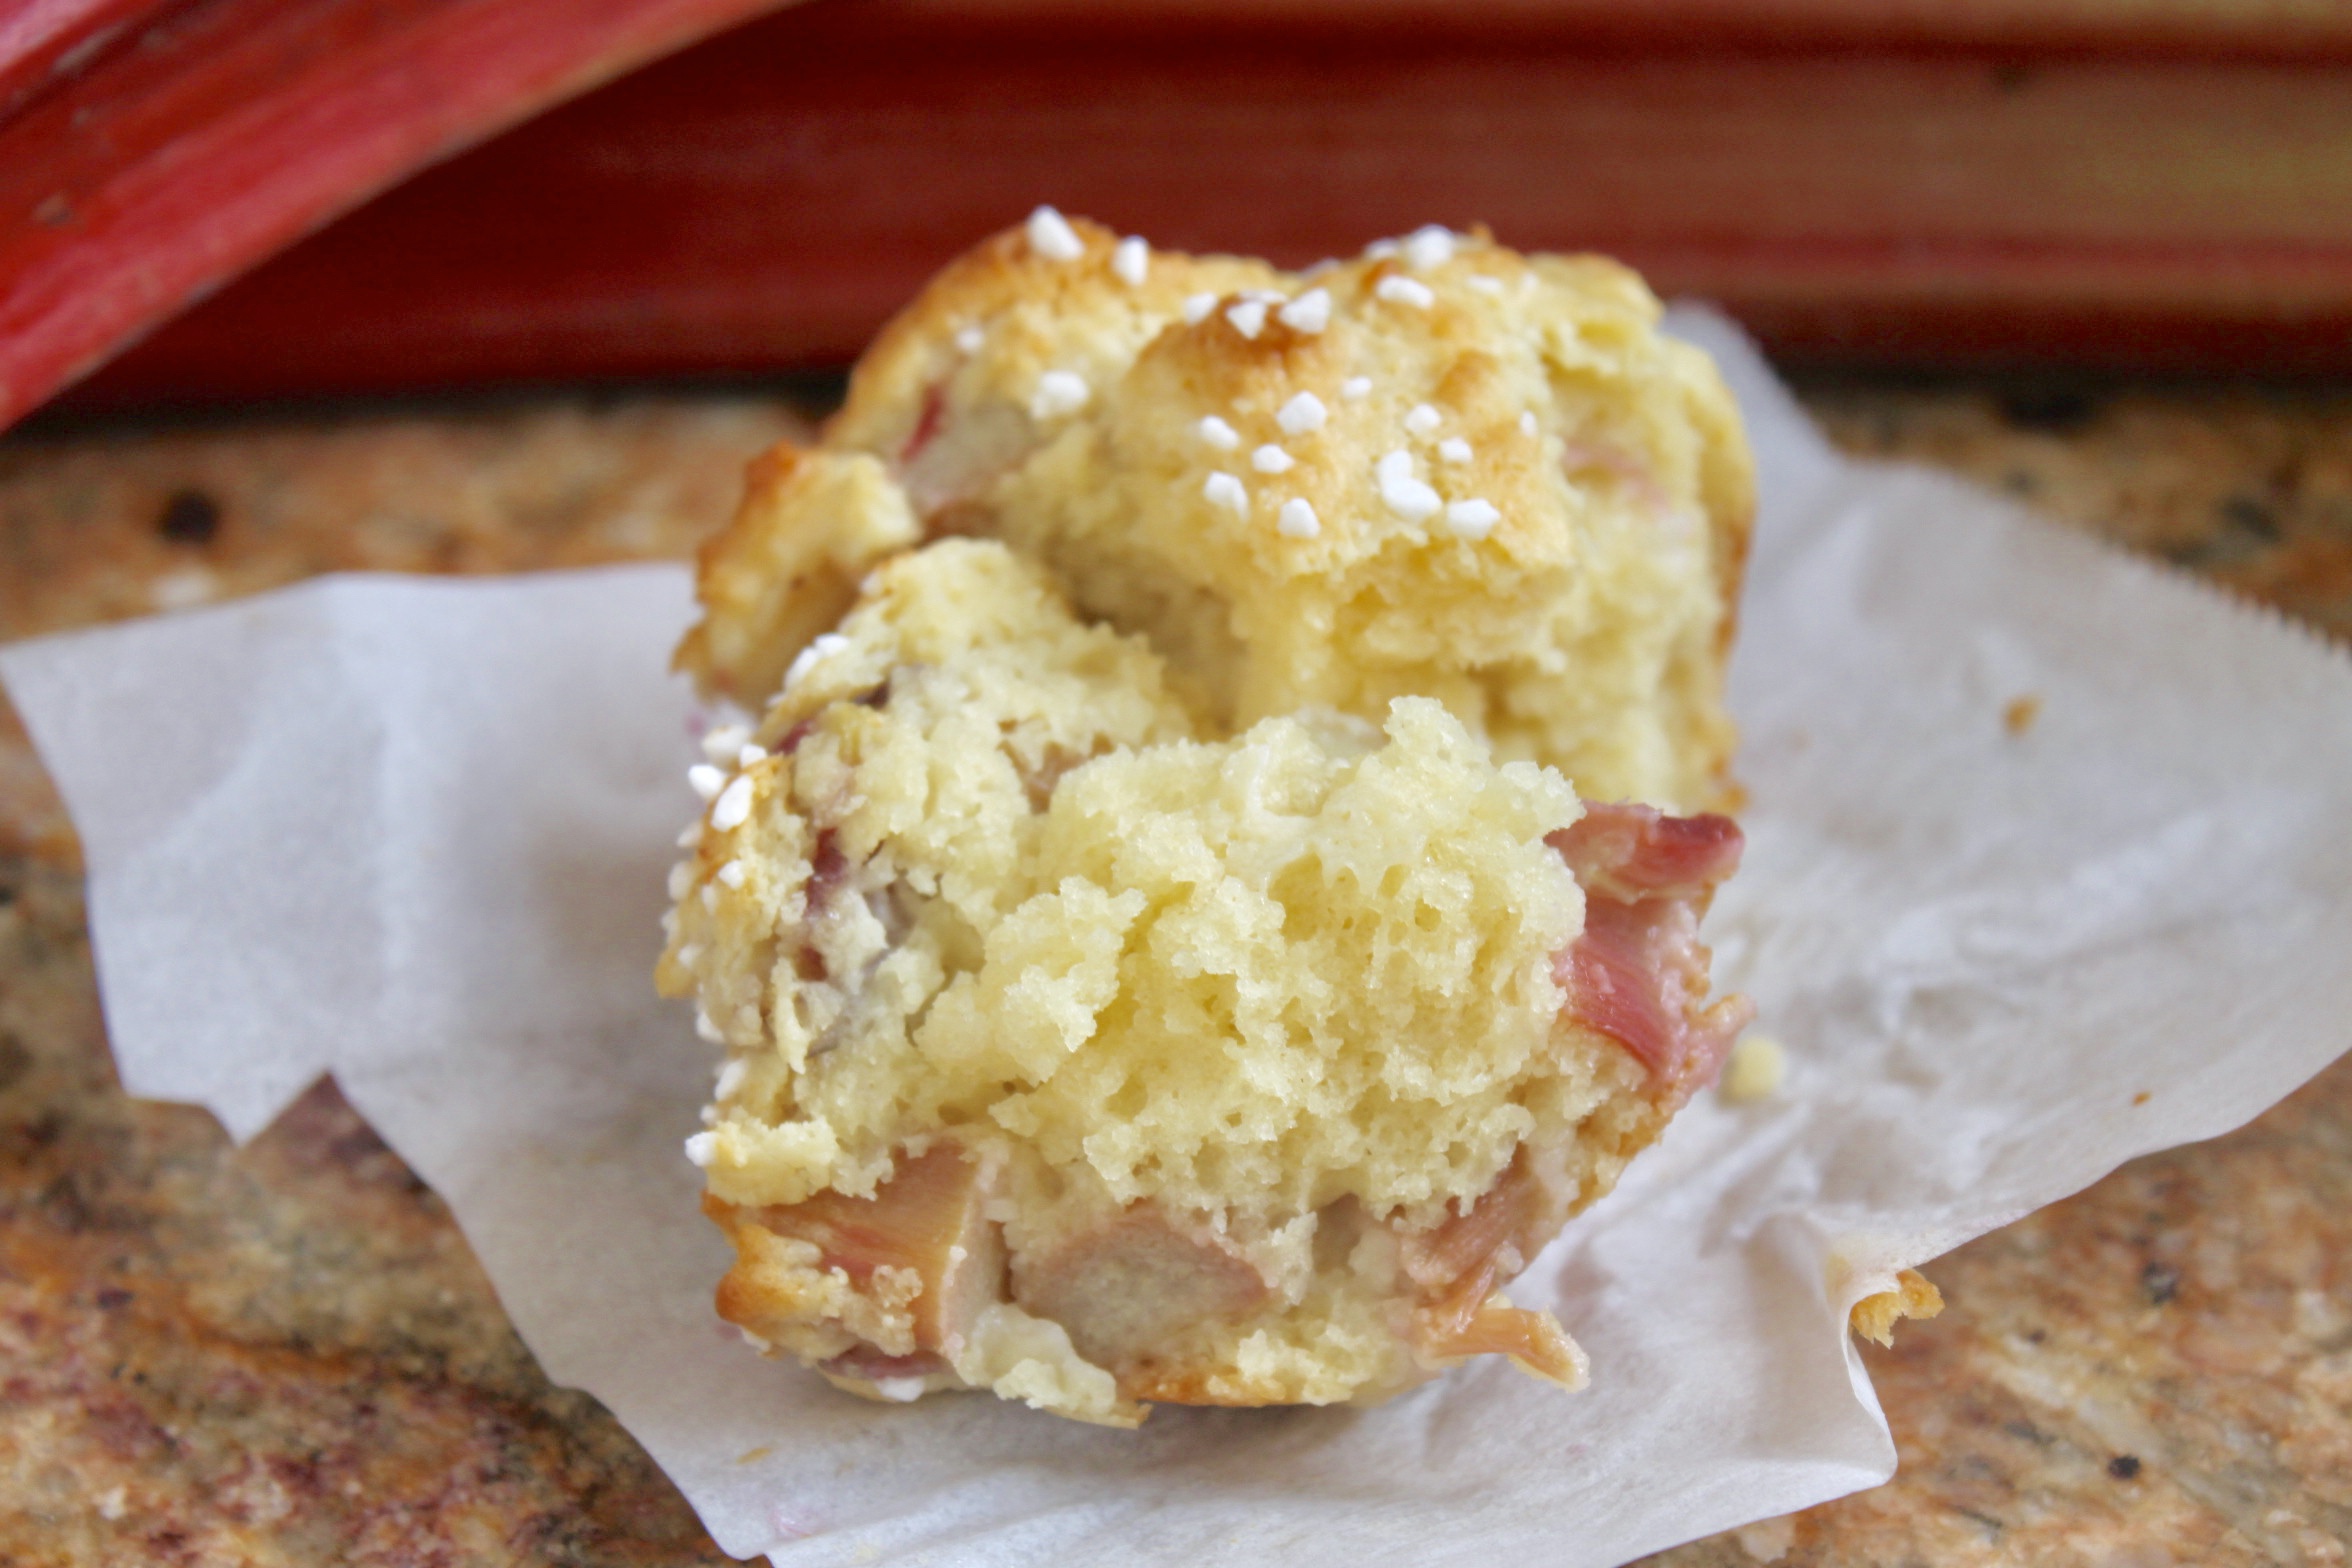 rhubarb muffin split open to see the fluffy interior